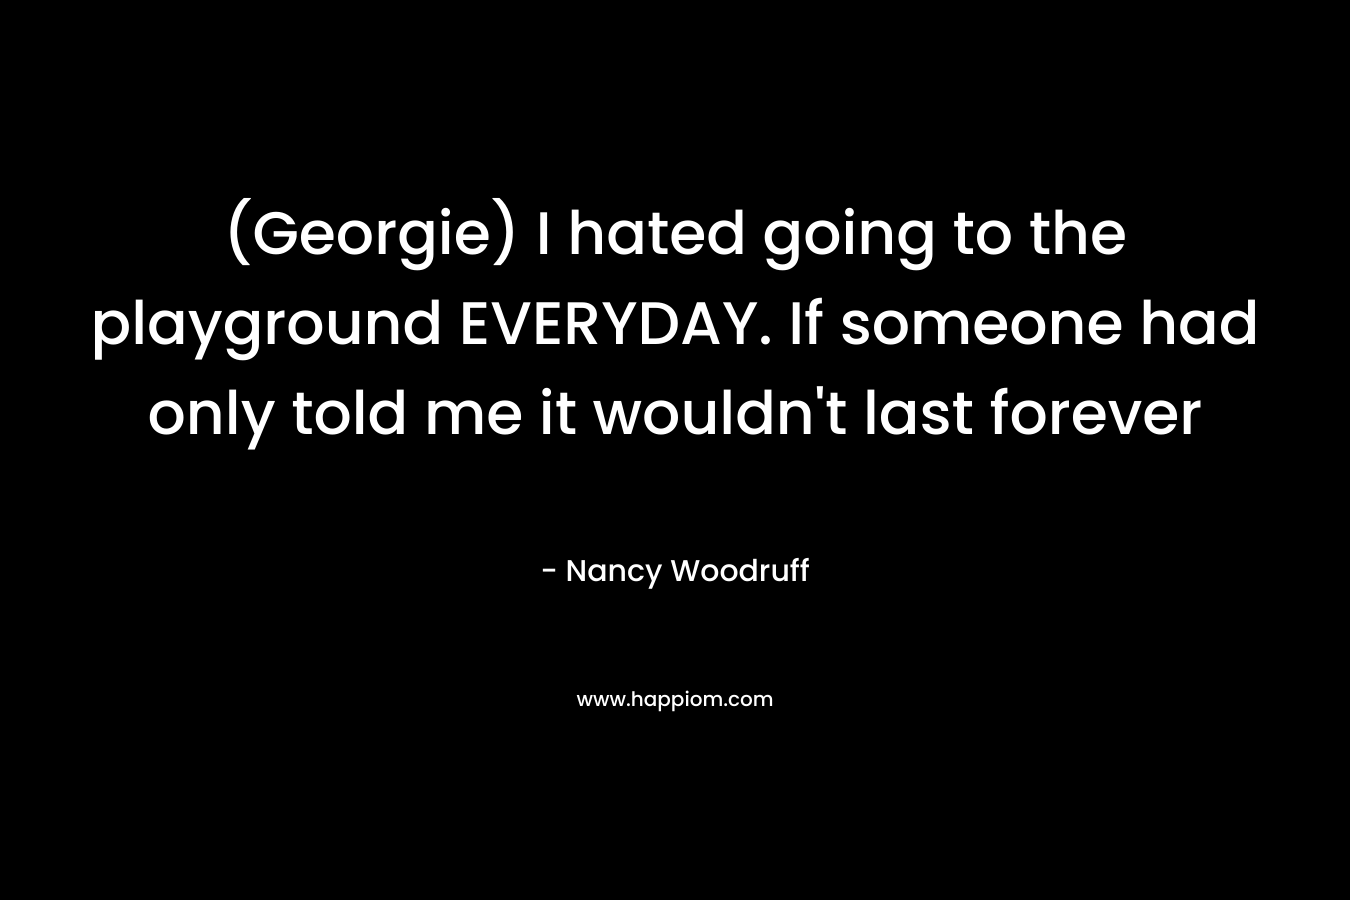 (Georgie) I hated going to the playground EVERYDAY. If someone had only told me it wouldn’t last forever – Nancy Woodruff